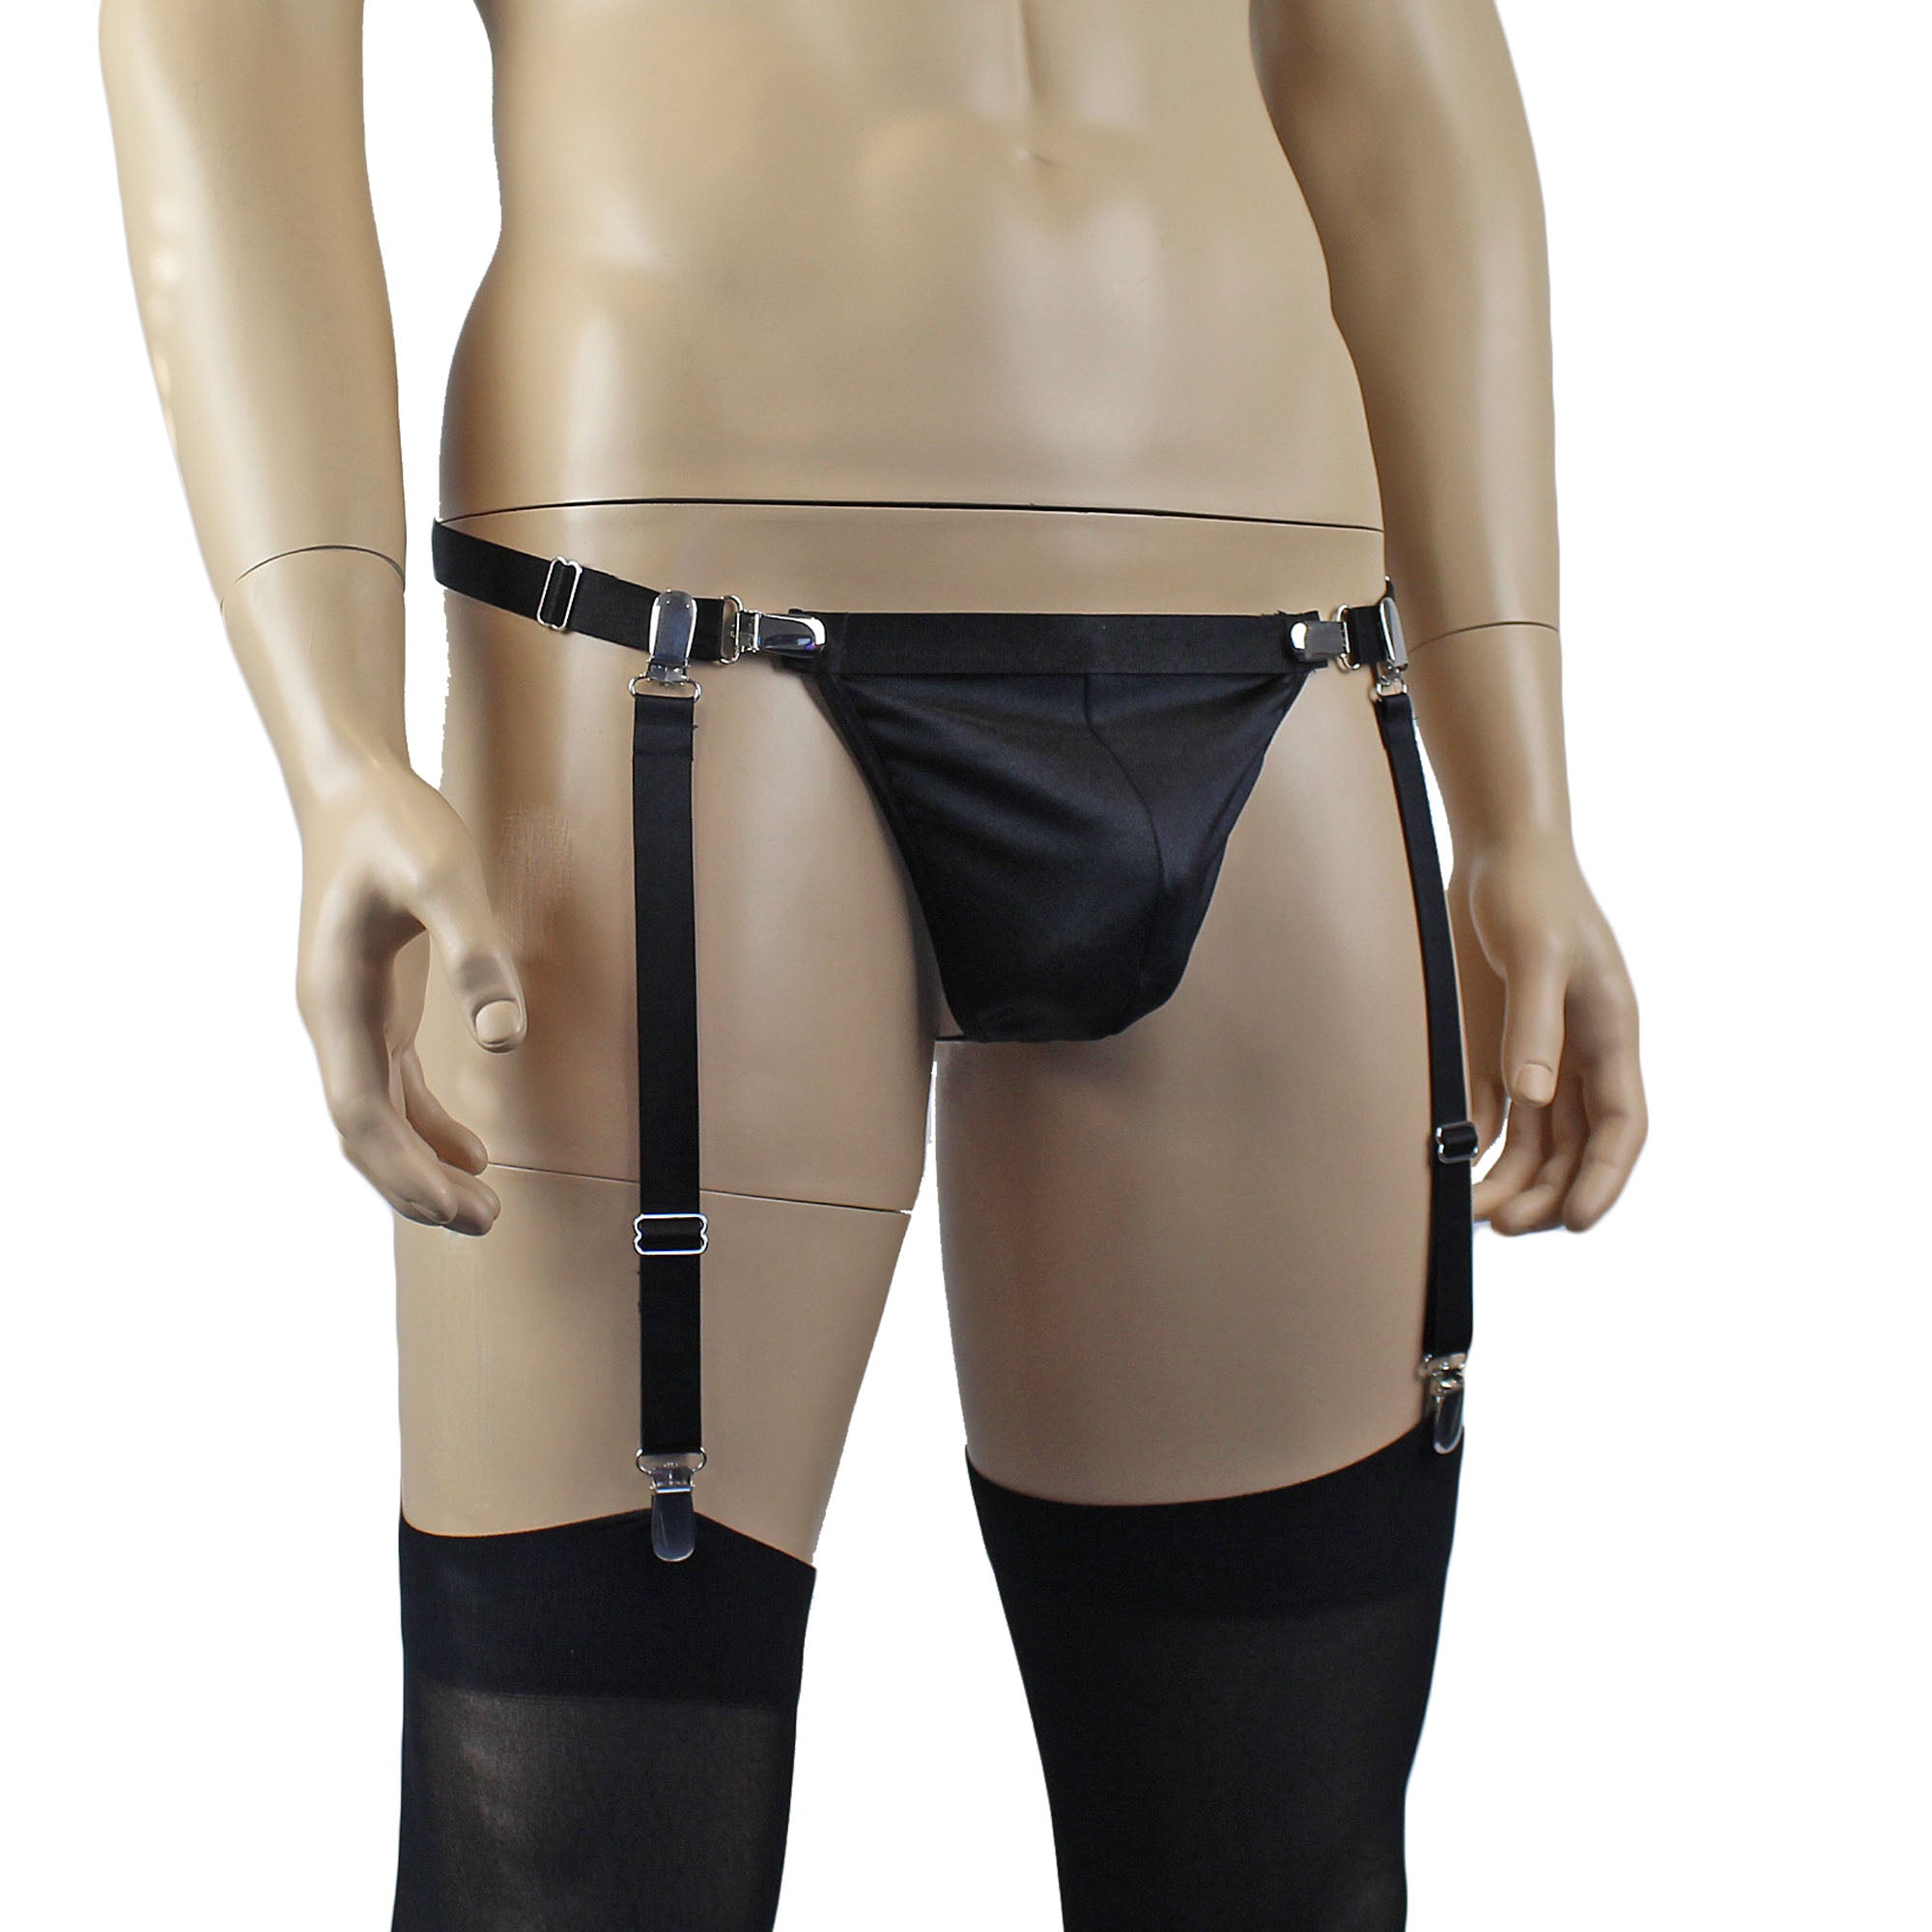 Mens Janice Thong with Adjustable Silver Clip Sides, Detachable Garters & Stockings Black